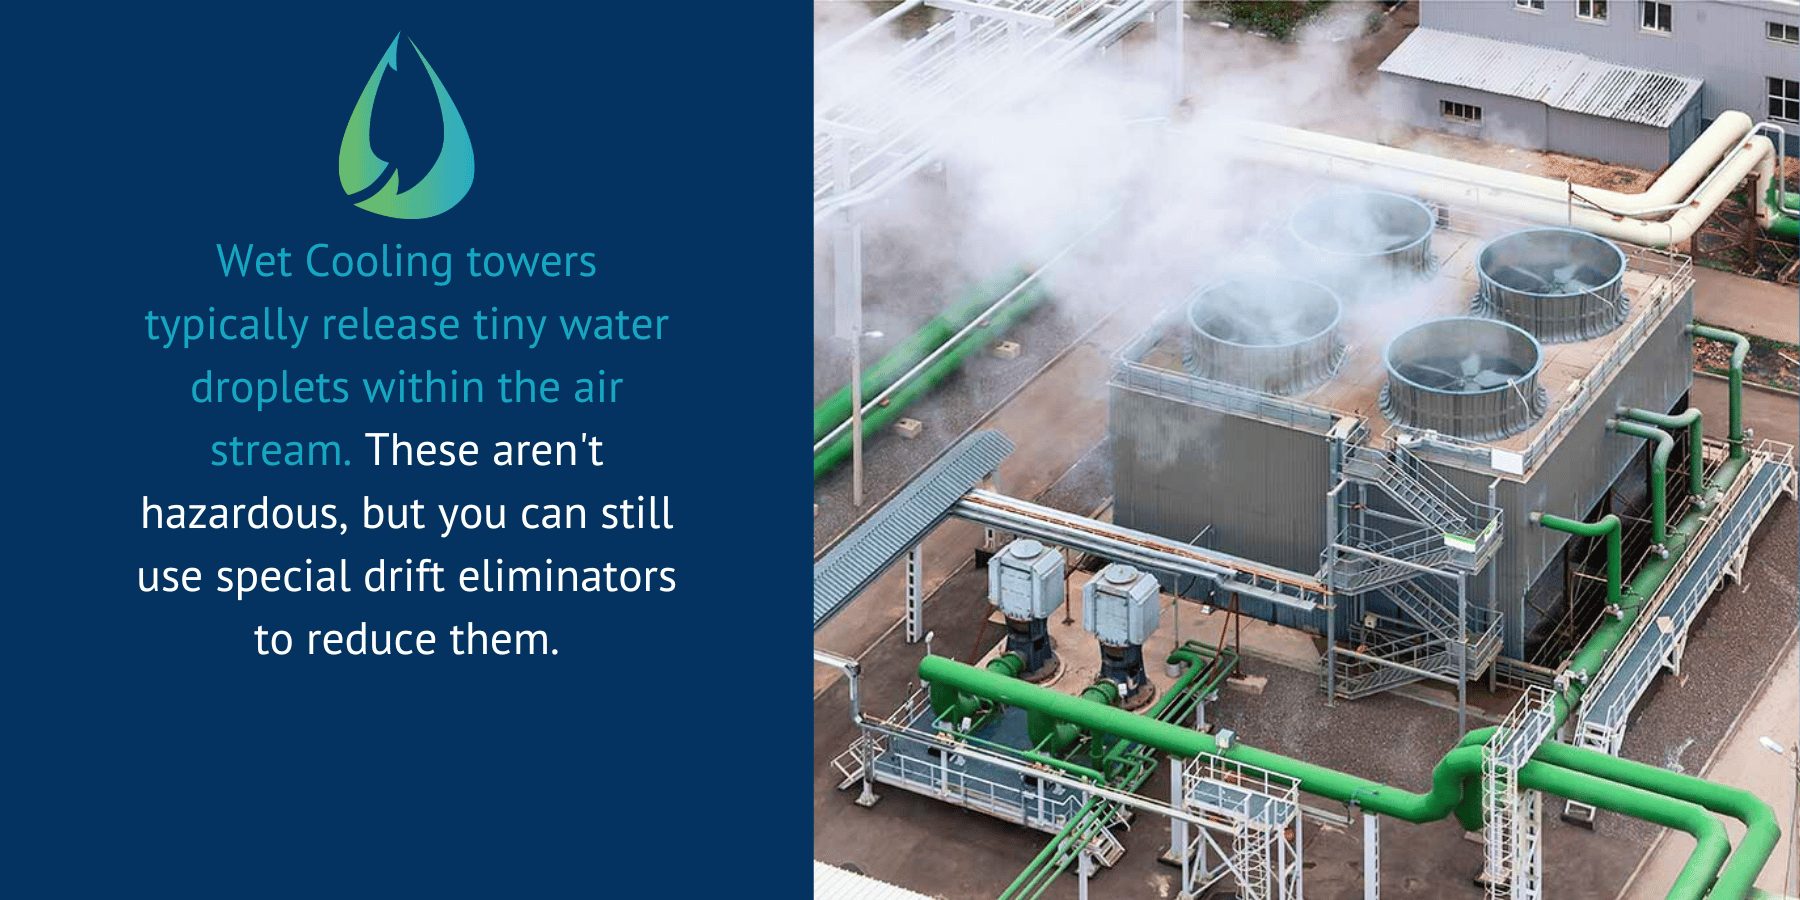 Wet Cooling Towers can use drift eliminators to reduce water droplets released.